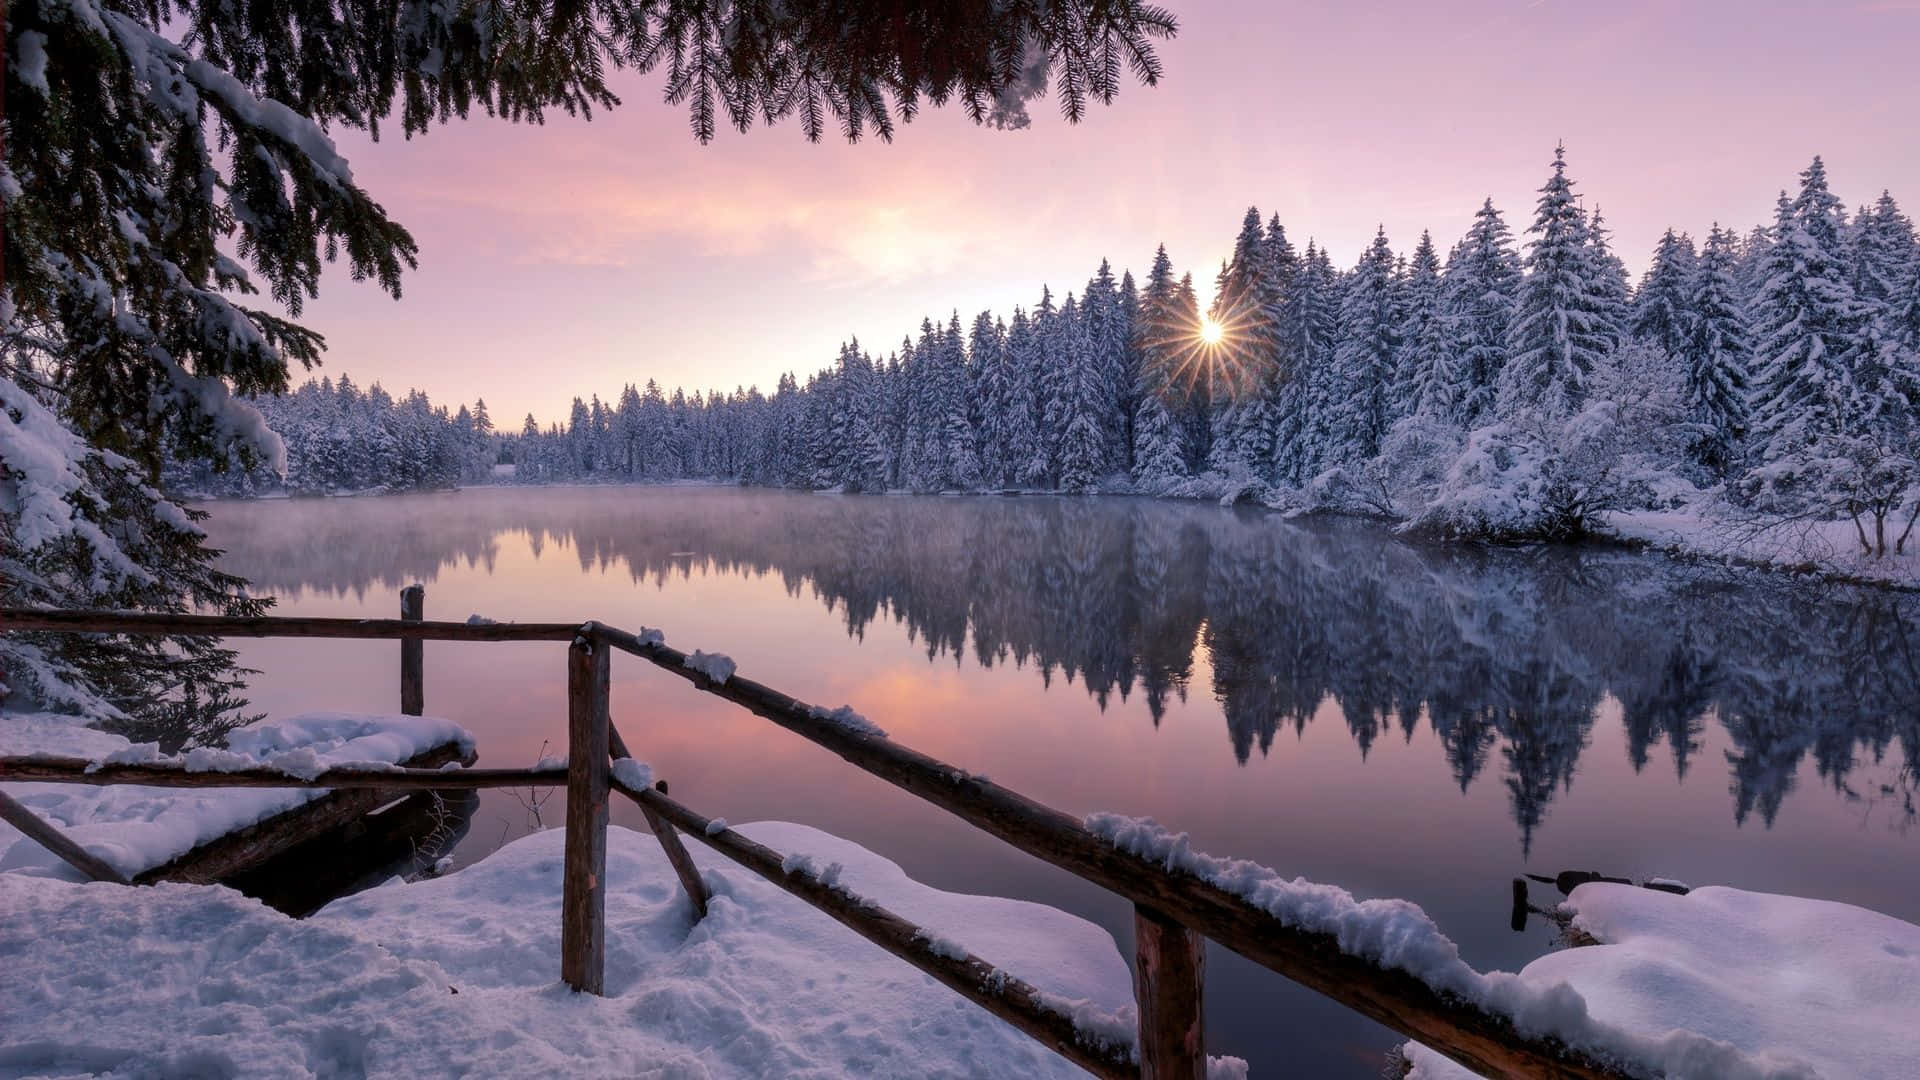 Enjoy the winter beauty of snow with this stunning 1080p wallpaper.